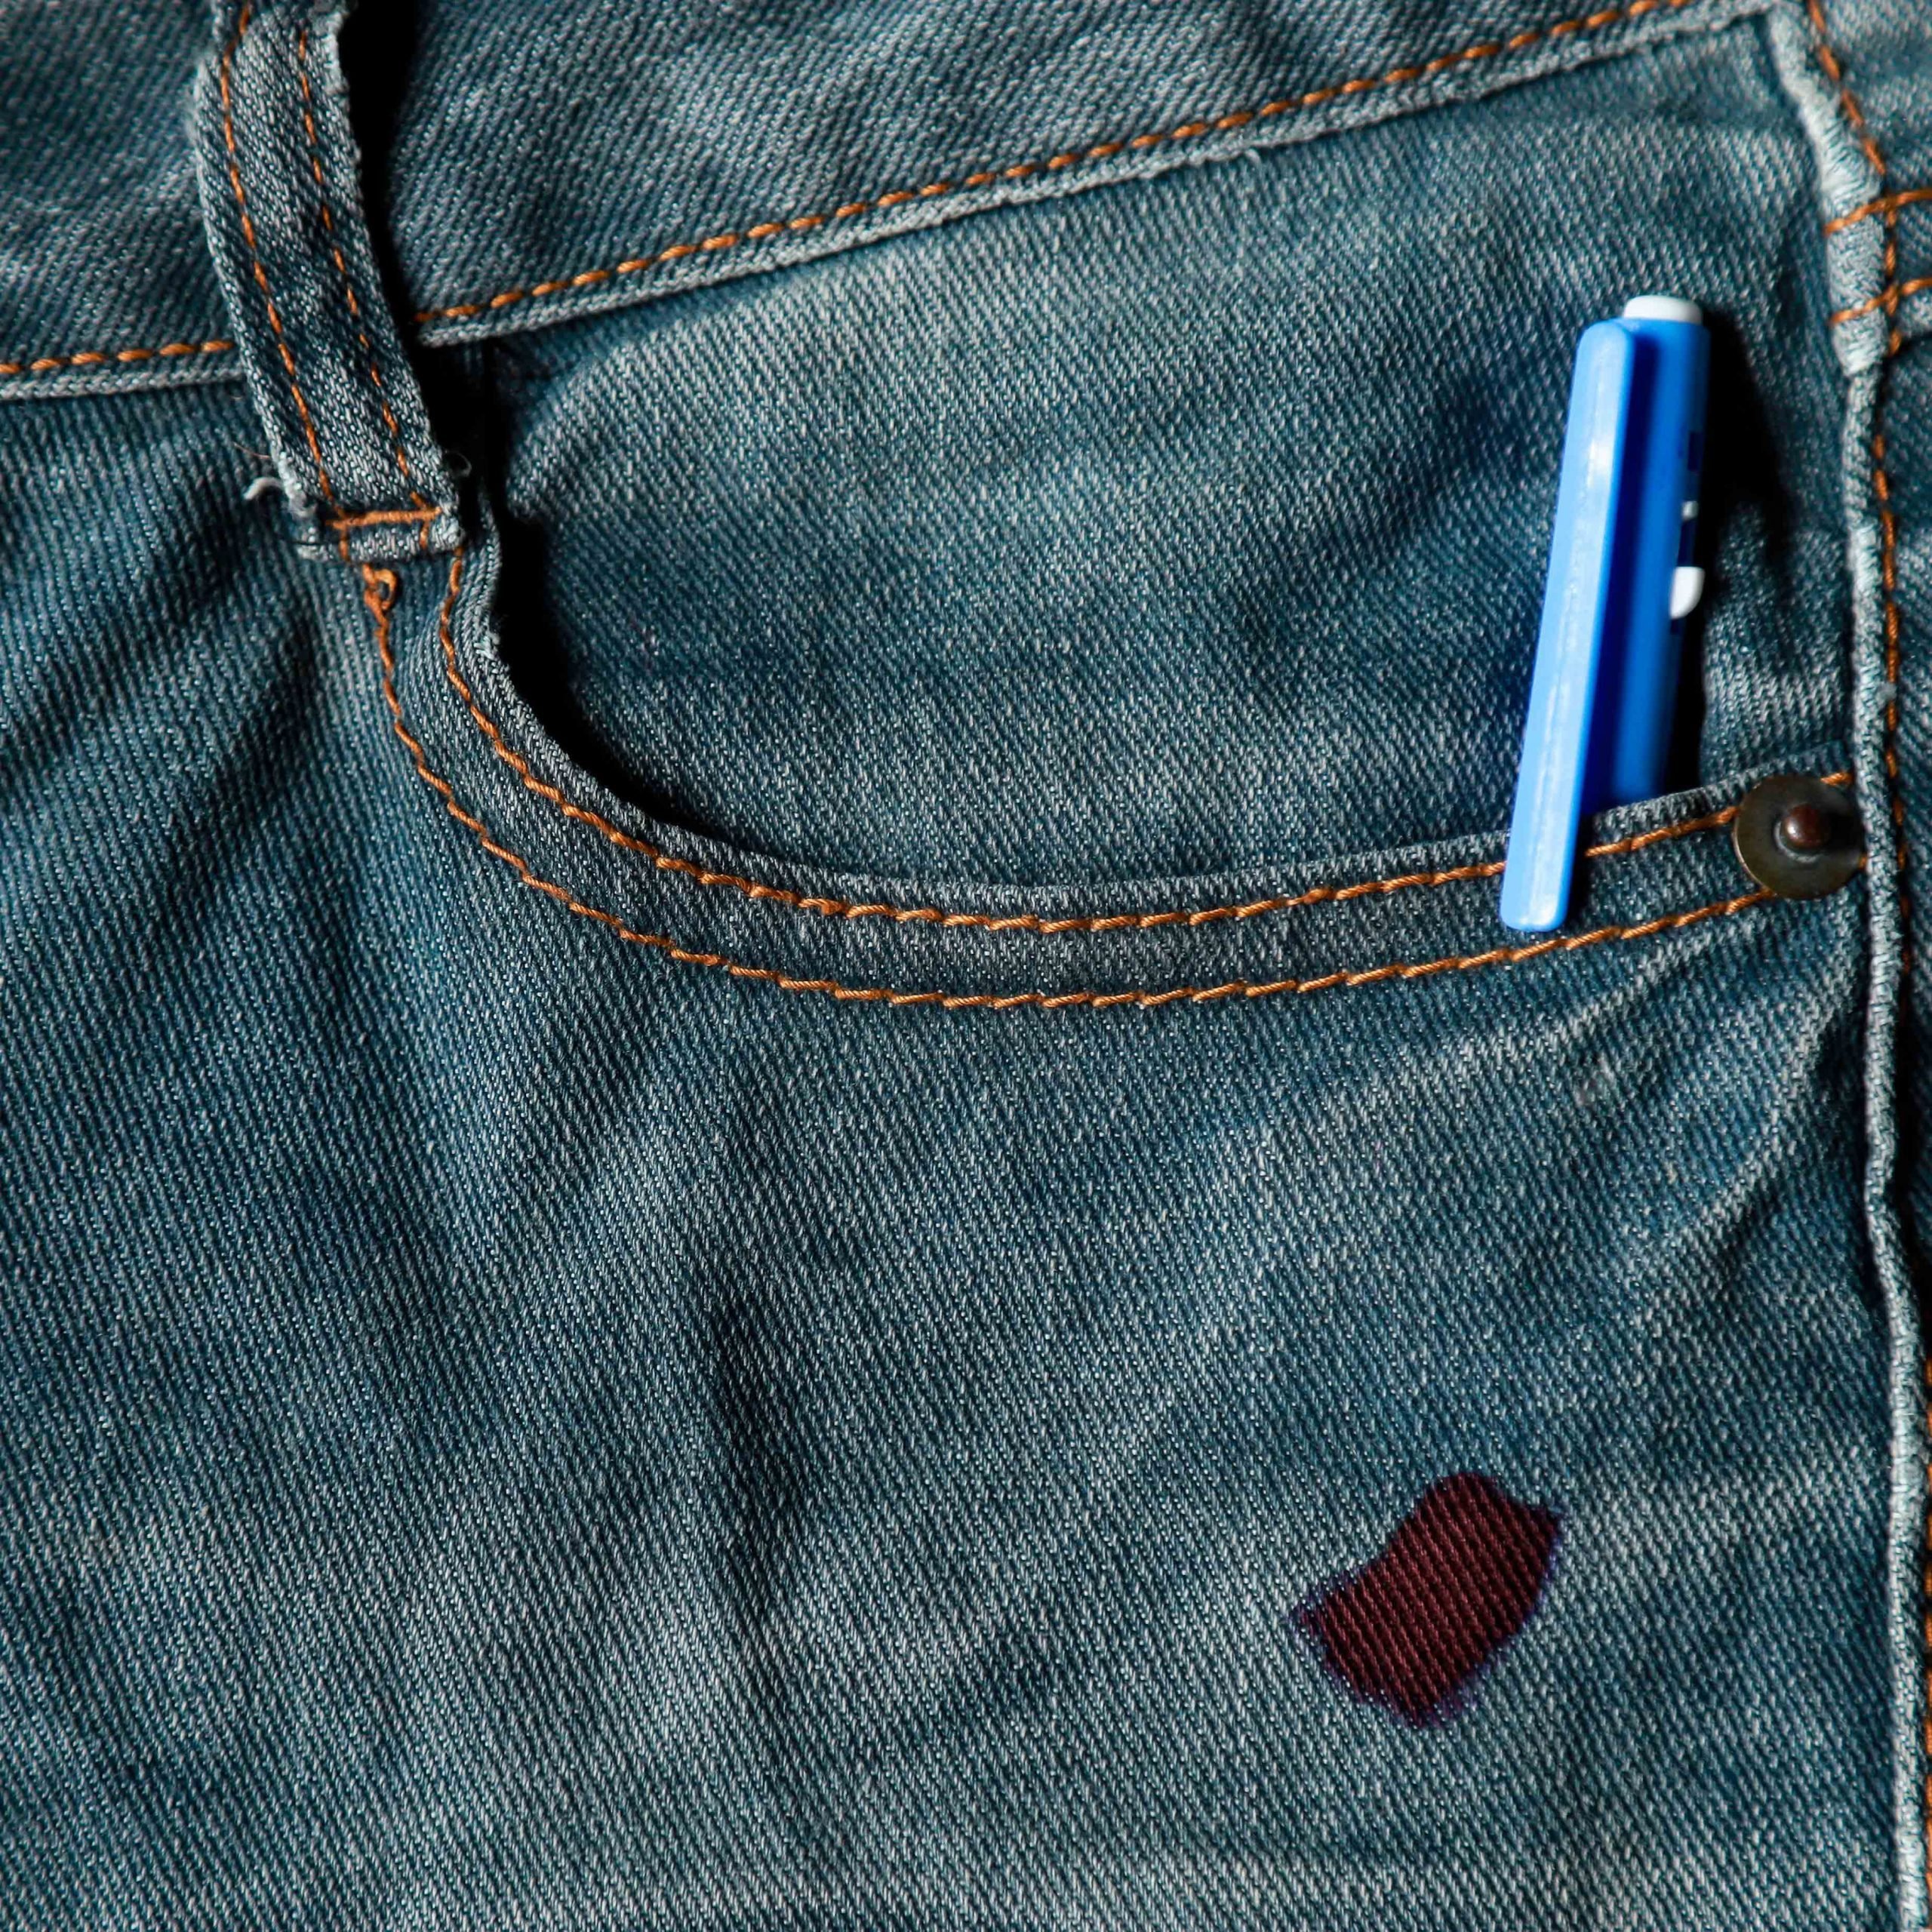 🖋️ Guide: Removing Ink Stains from Clothes & Fabric Effectively!